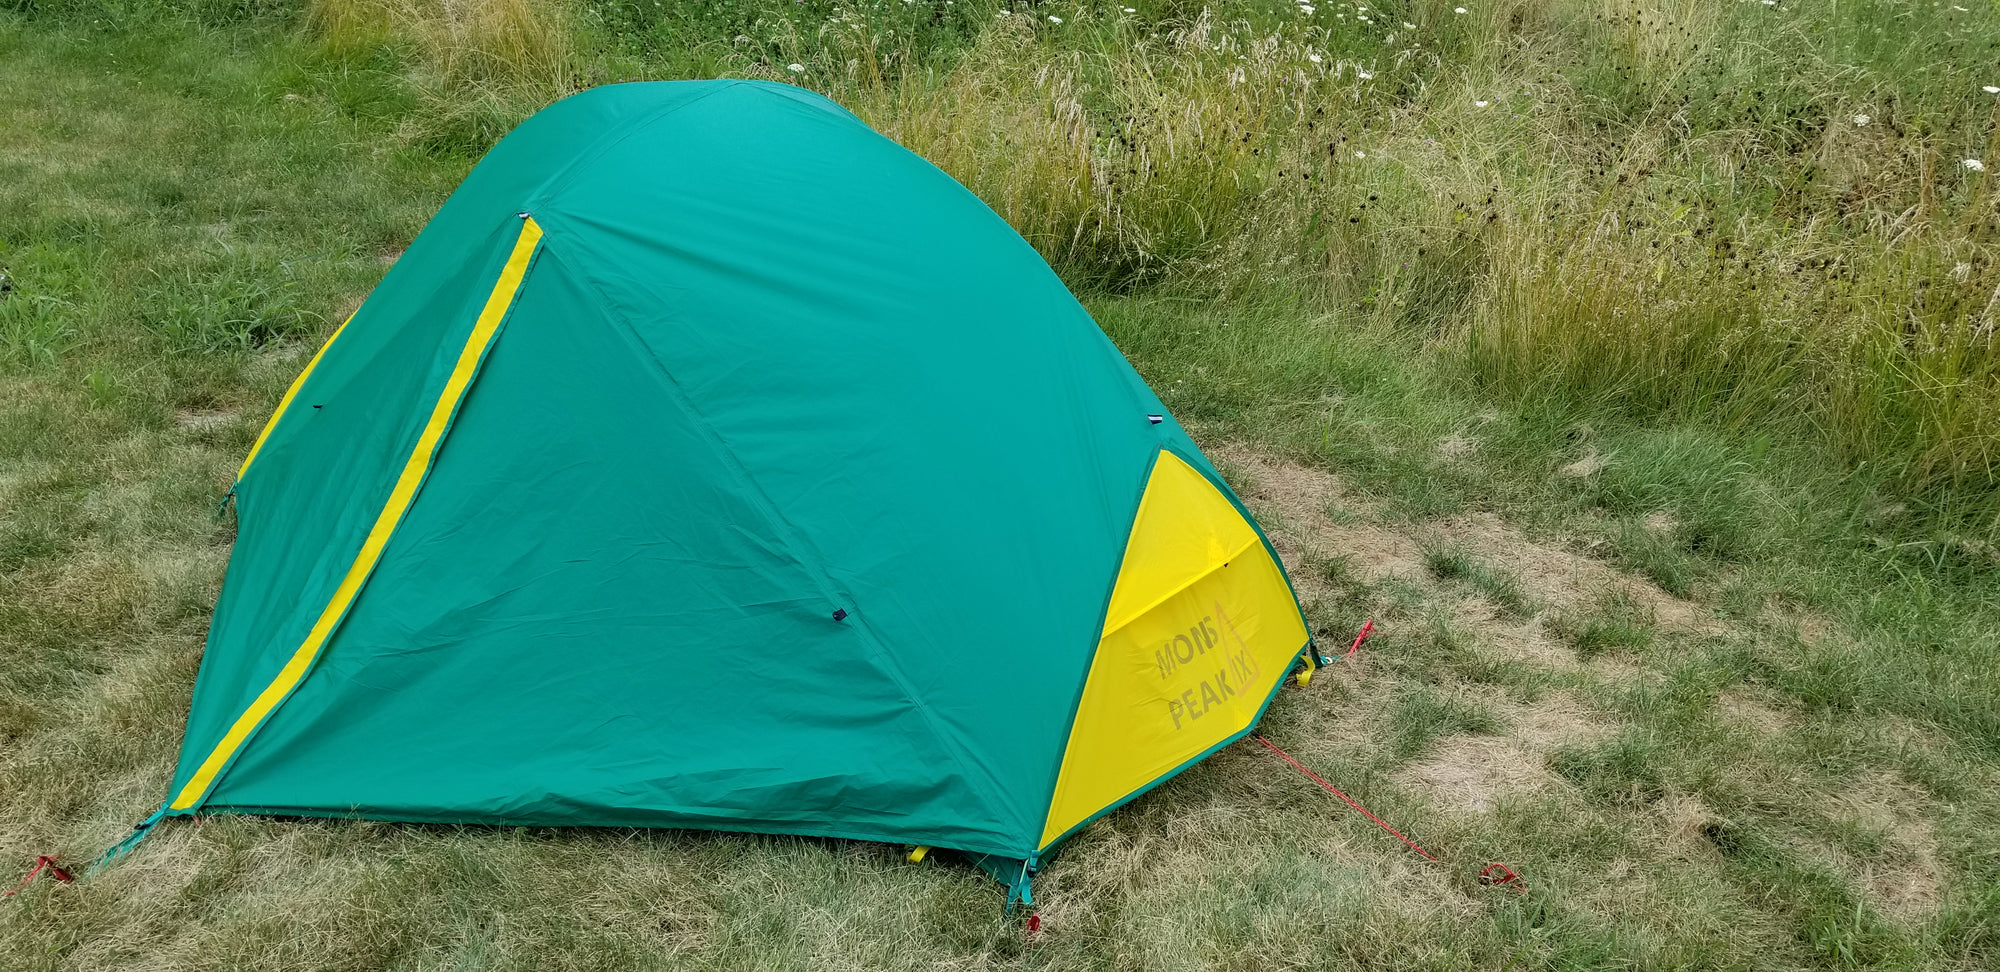 Trail 21+ Triple Tough - 2 Person and 1+ Person 2-in-1 Backpacking Tent (full kit)